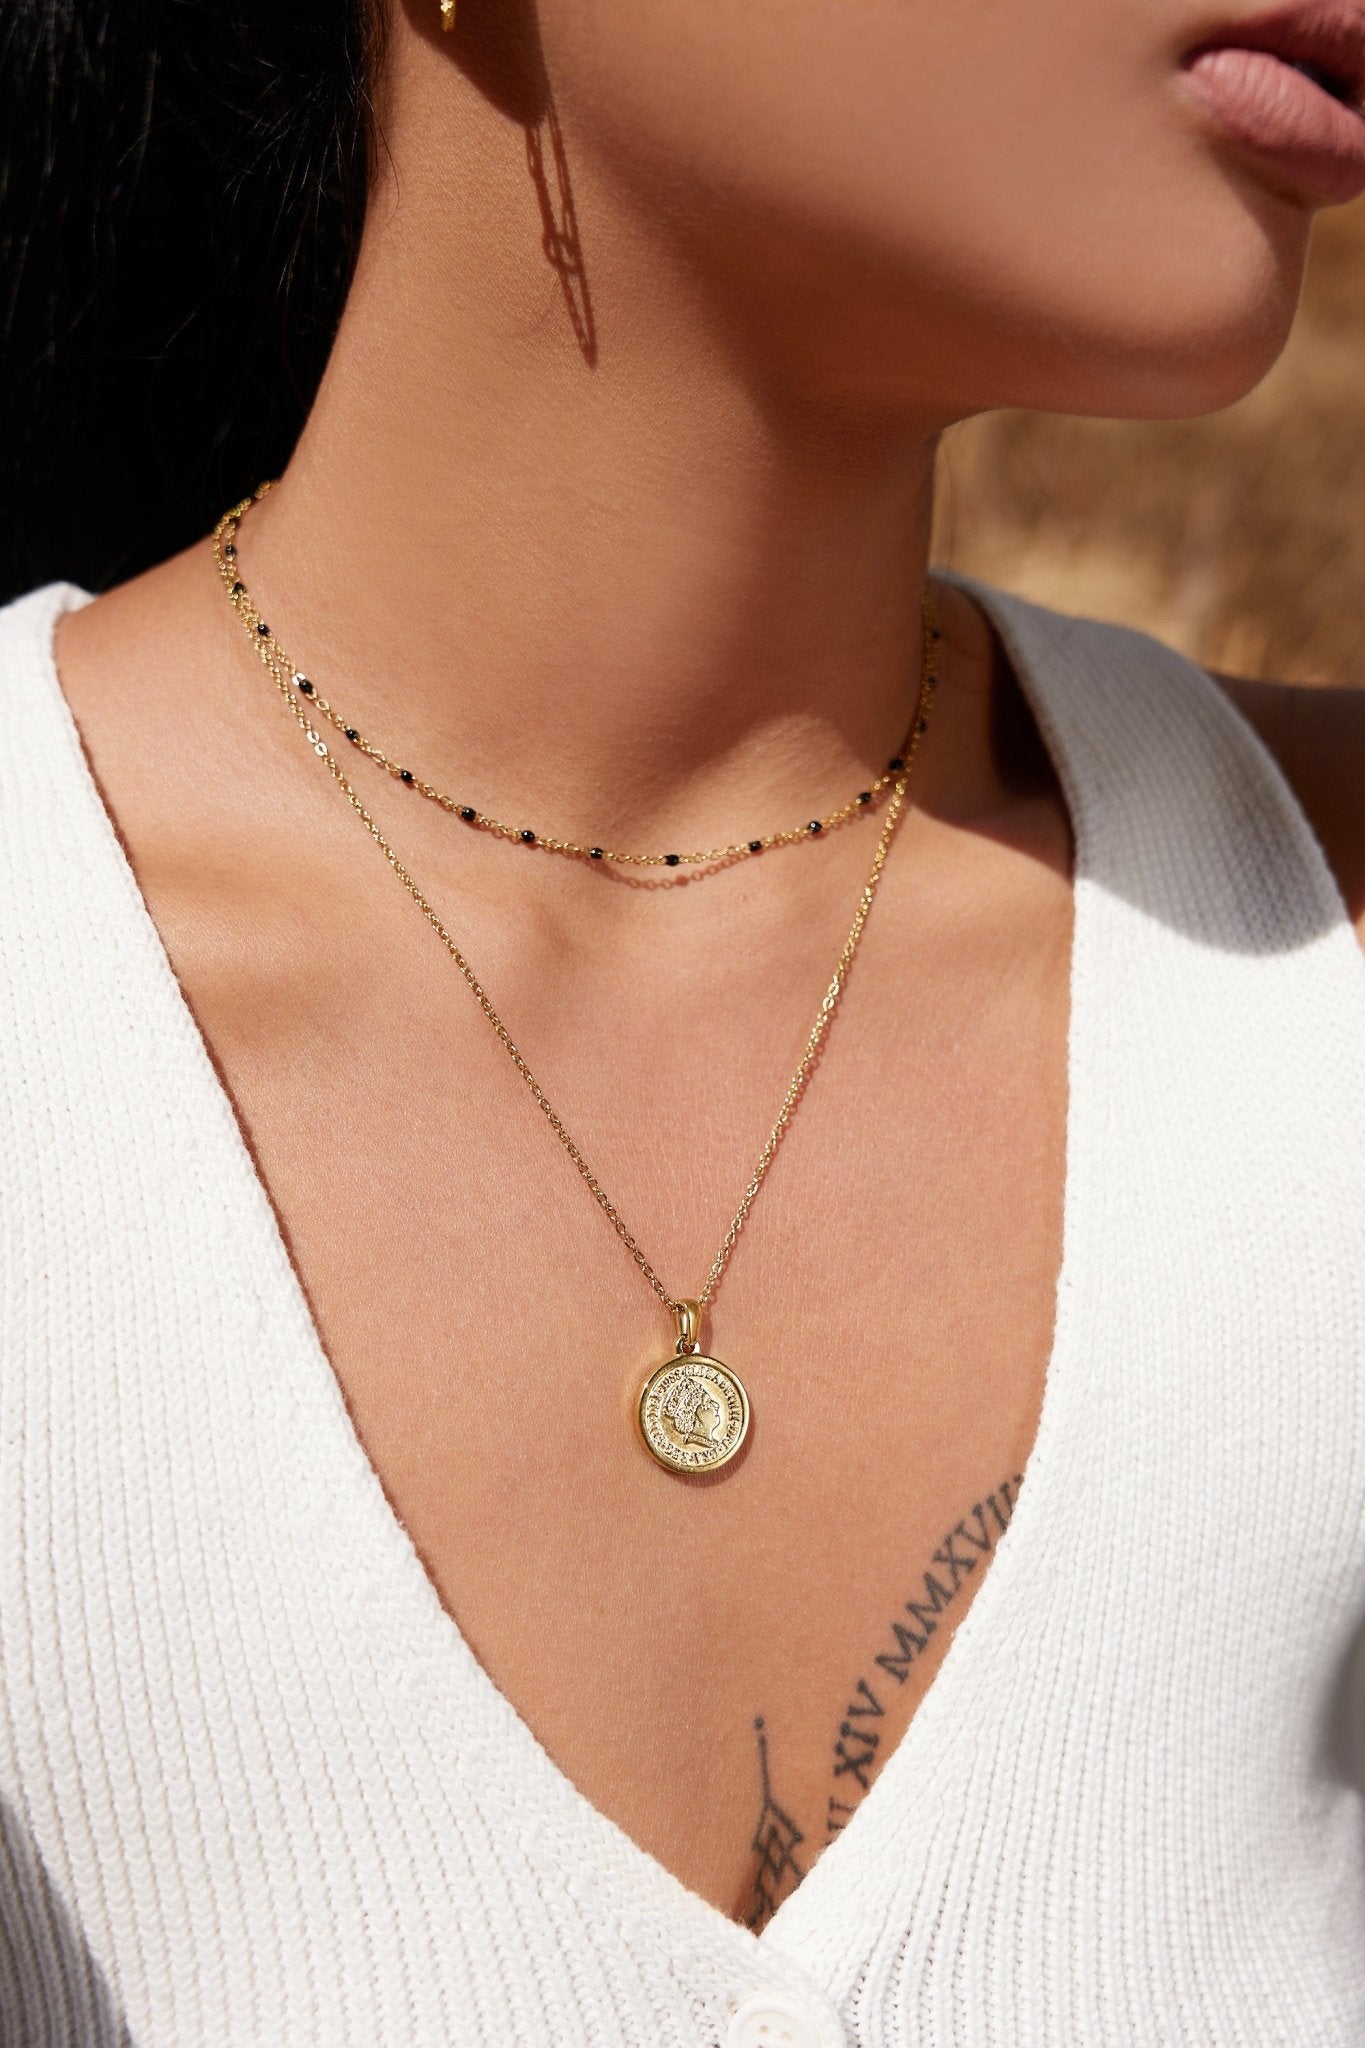 Queen Coin Necklace in Gold - Flaire & Co.